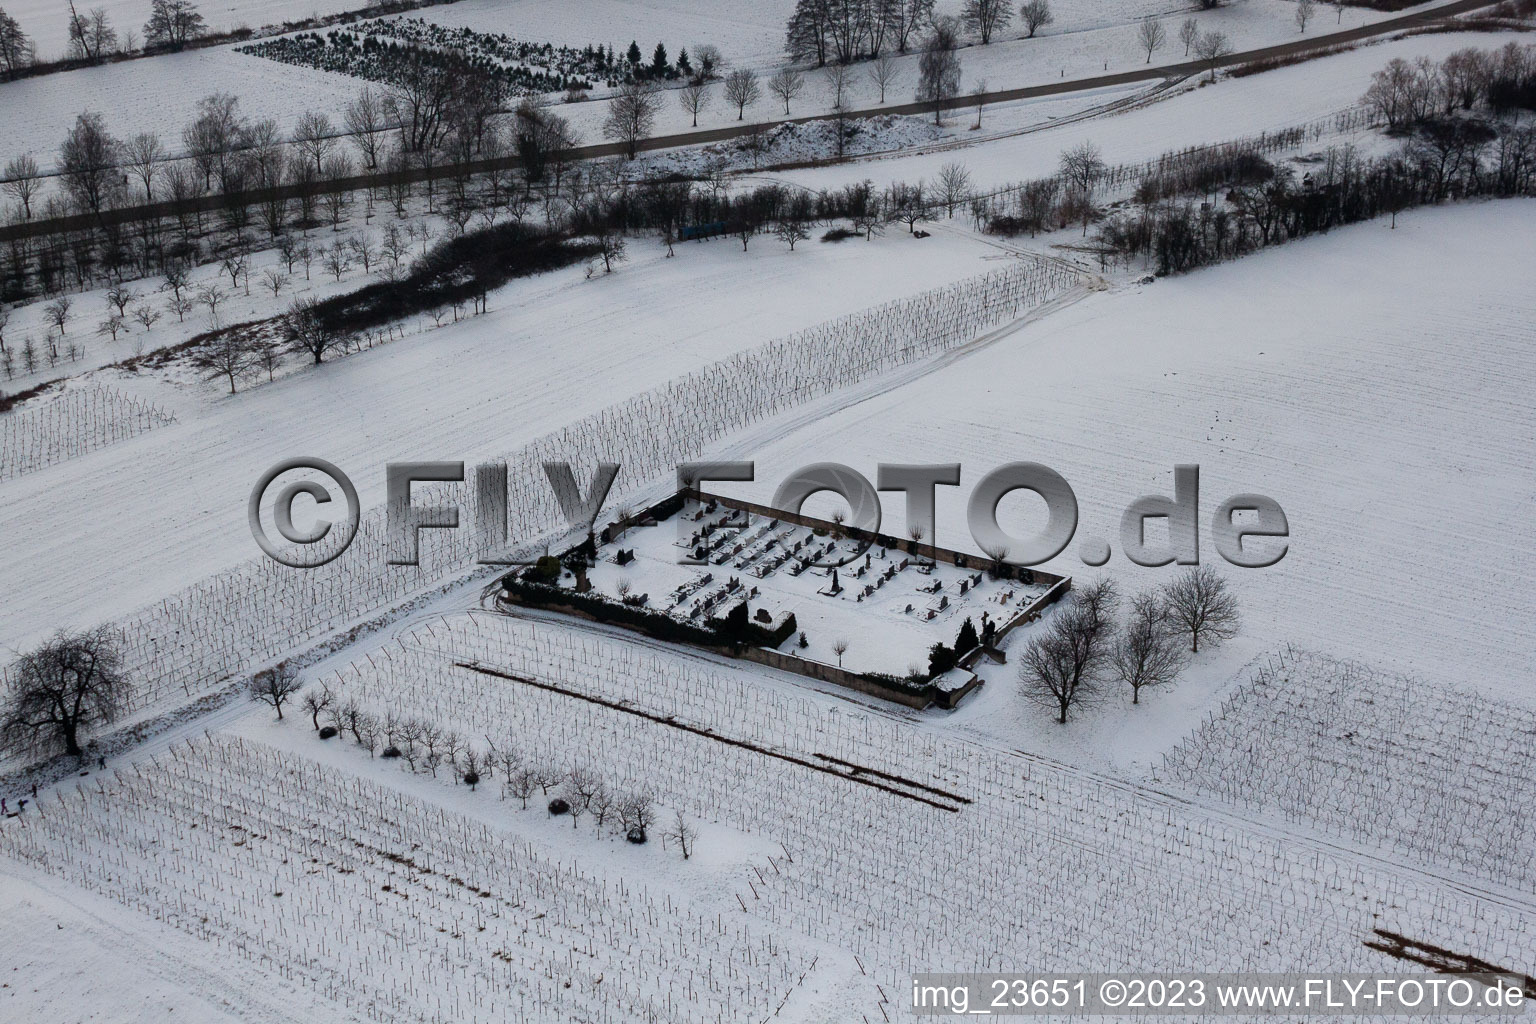 Aerial photograpy of Cemetery in the snow in the district Kleinsteinfeld in Niederotterbach in the state Rhineland-Palatinate, Germany